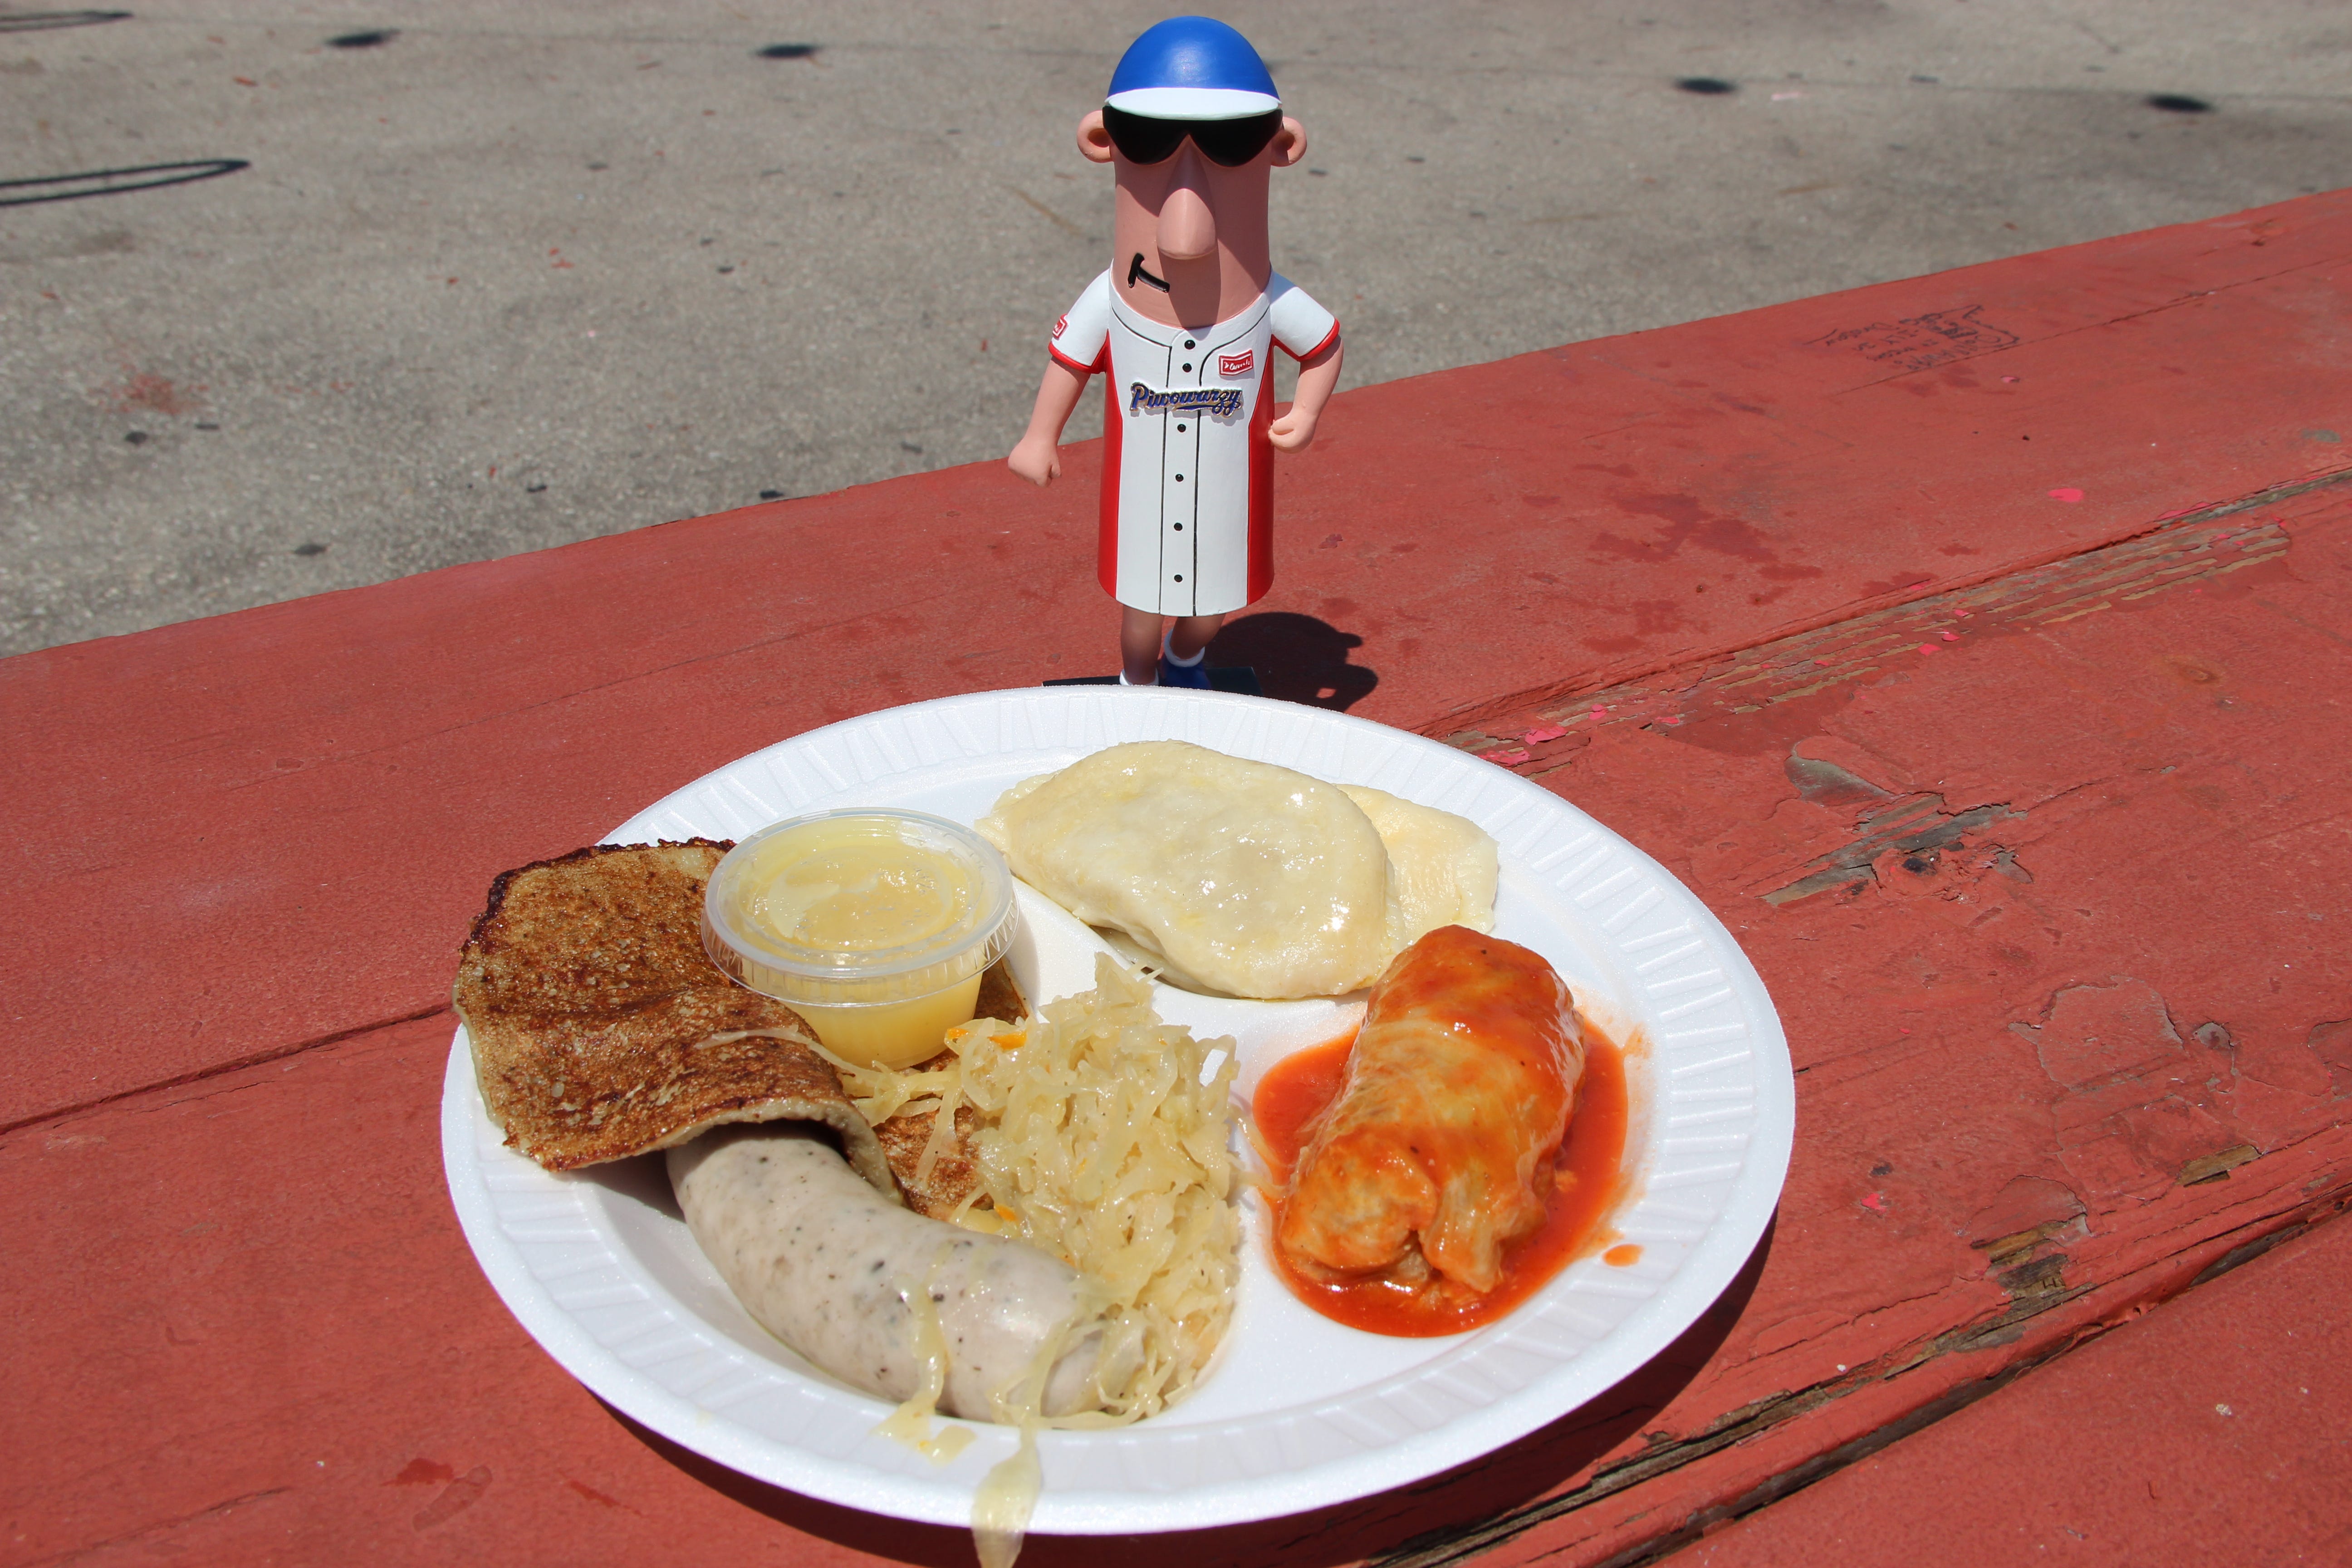 Sunday, June 23: Klement's Famous Racing Sausages Polish Sausage Bobble, by Caitlin Moyer